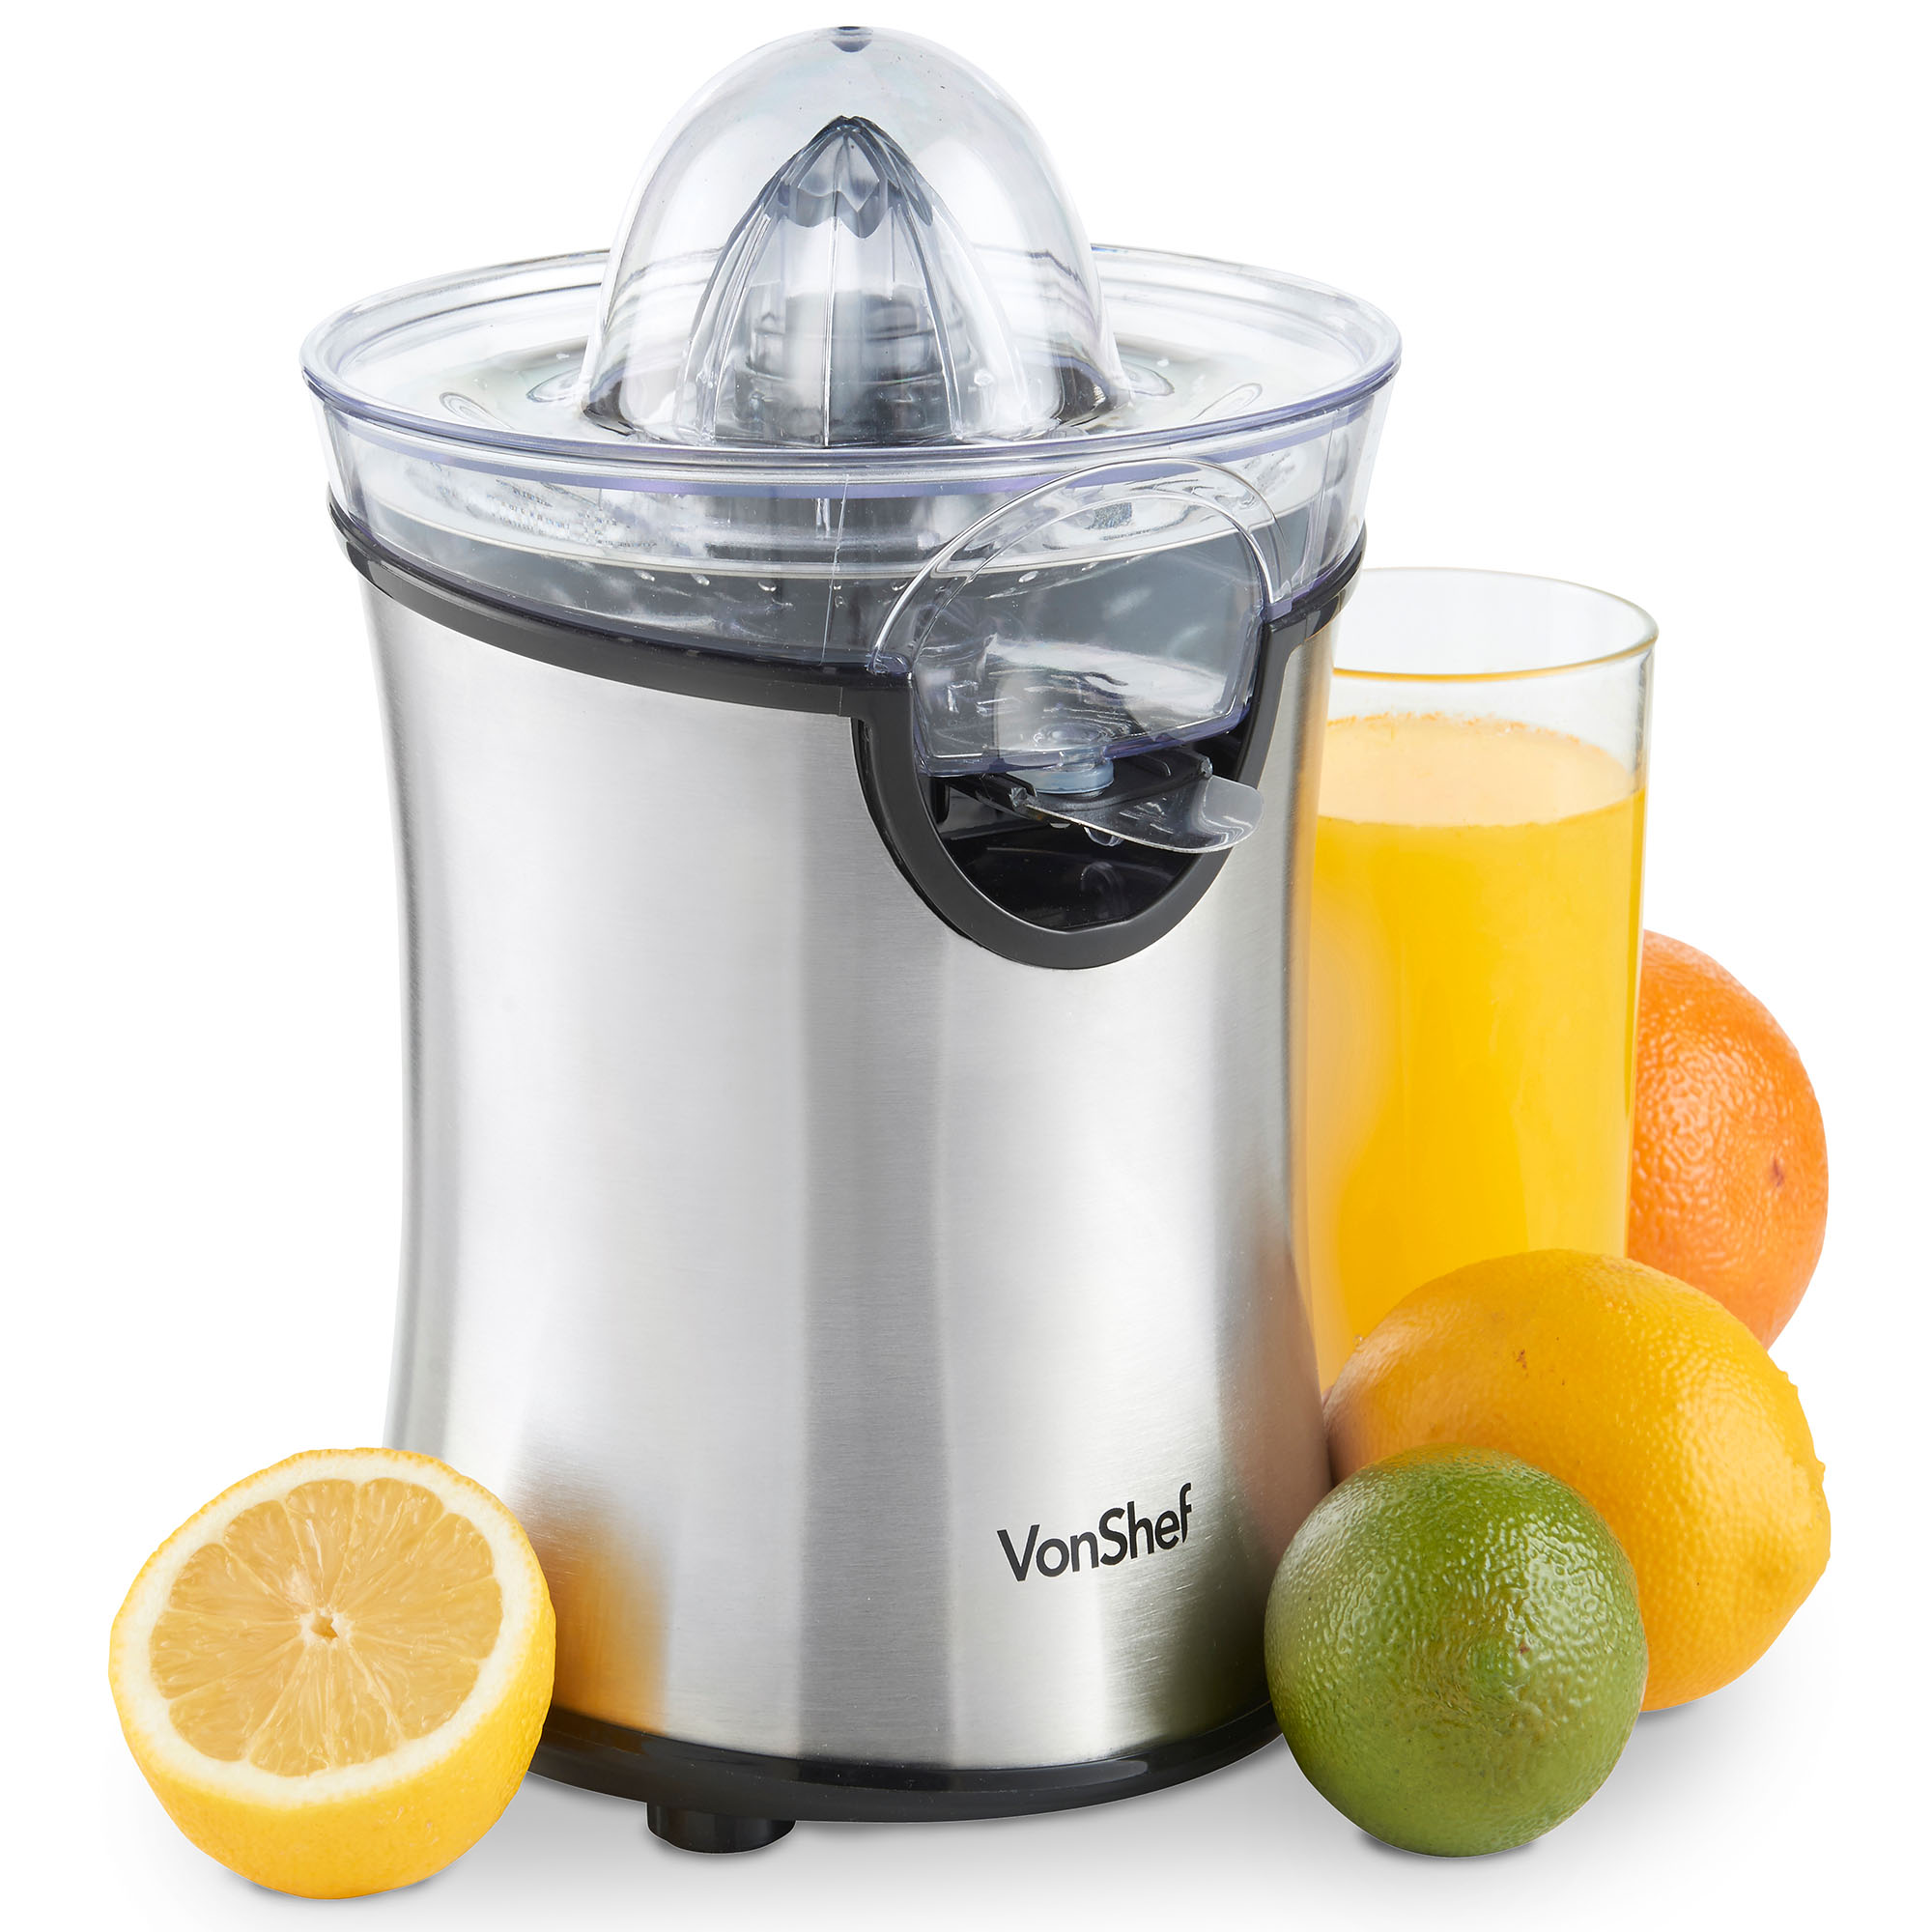 VonShef Electric Citrus Juicer Fruit 100W Stainless Steel